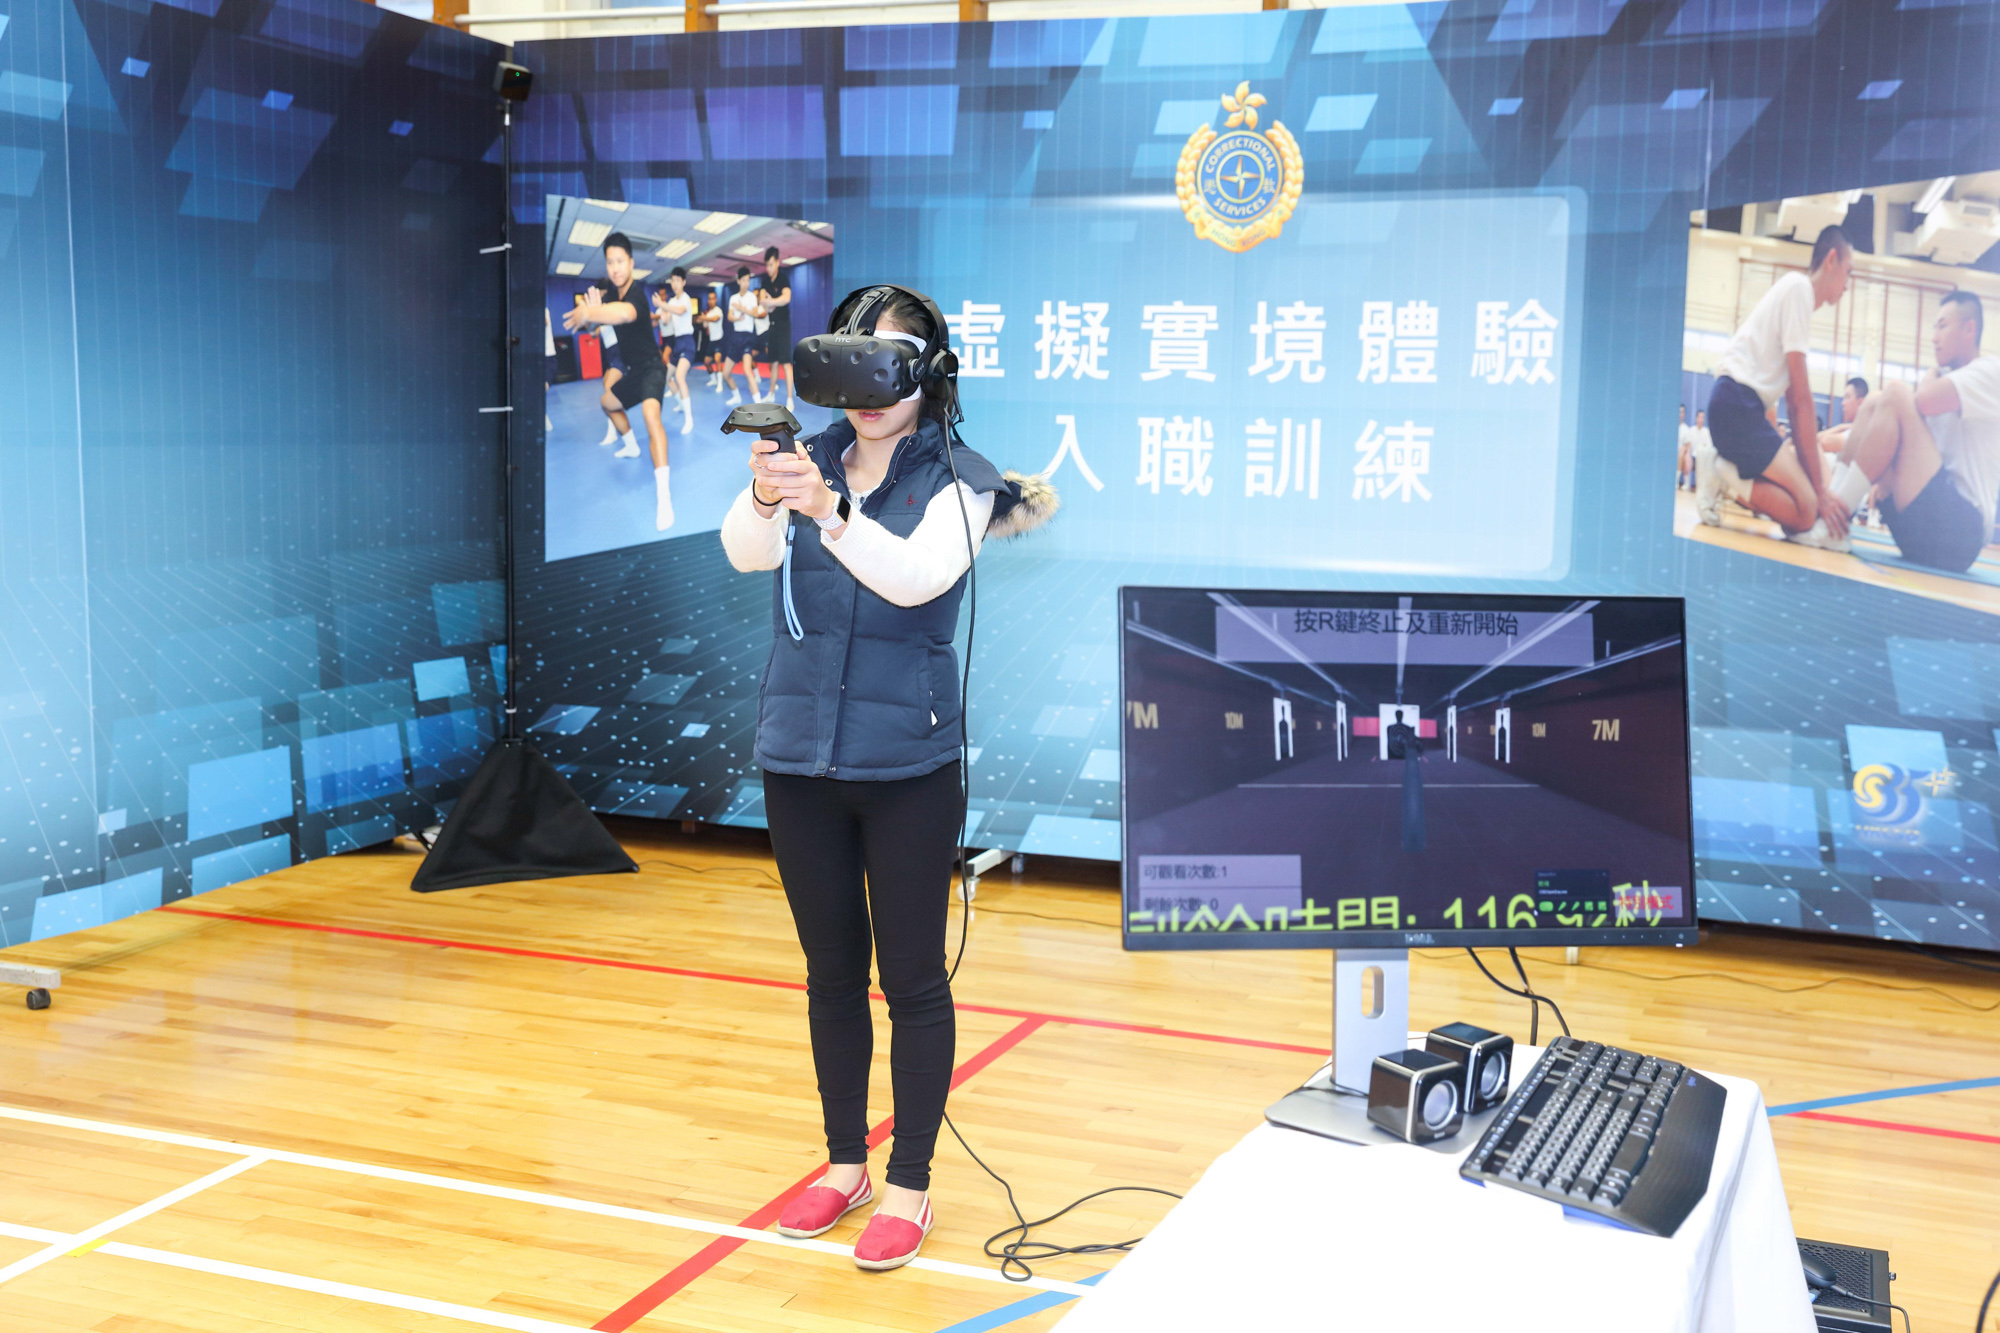 The public explore the highlights of recruit training through virtual reality facility during the Open Day of the Staff Training Institute.